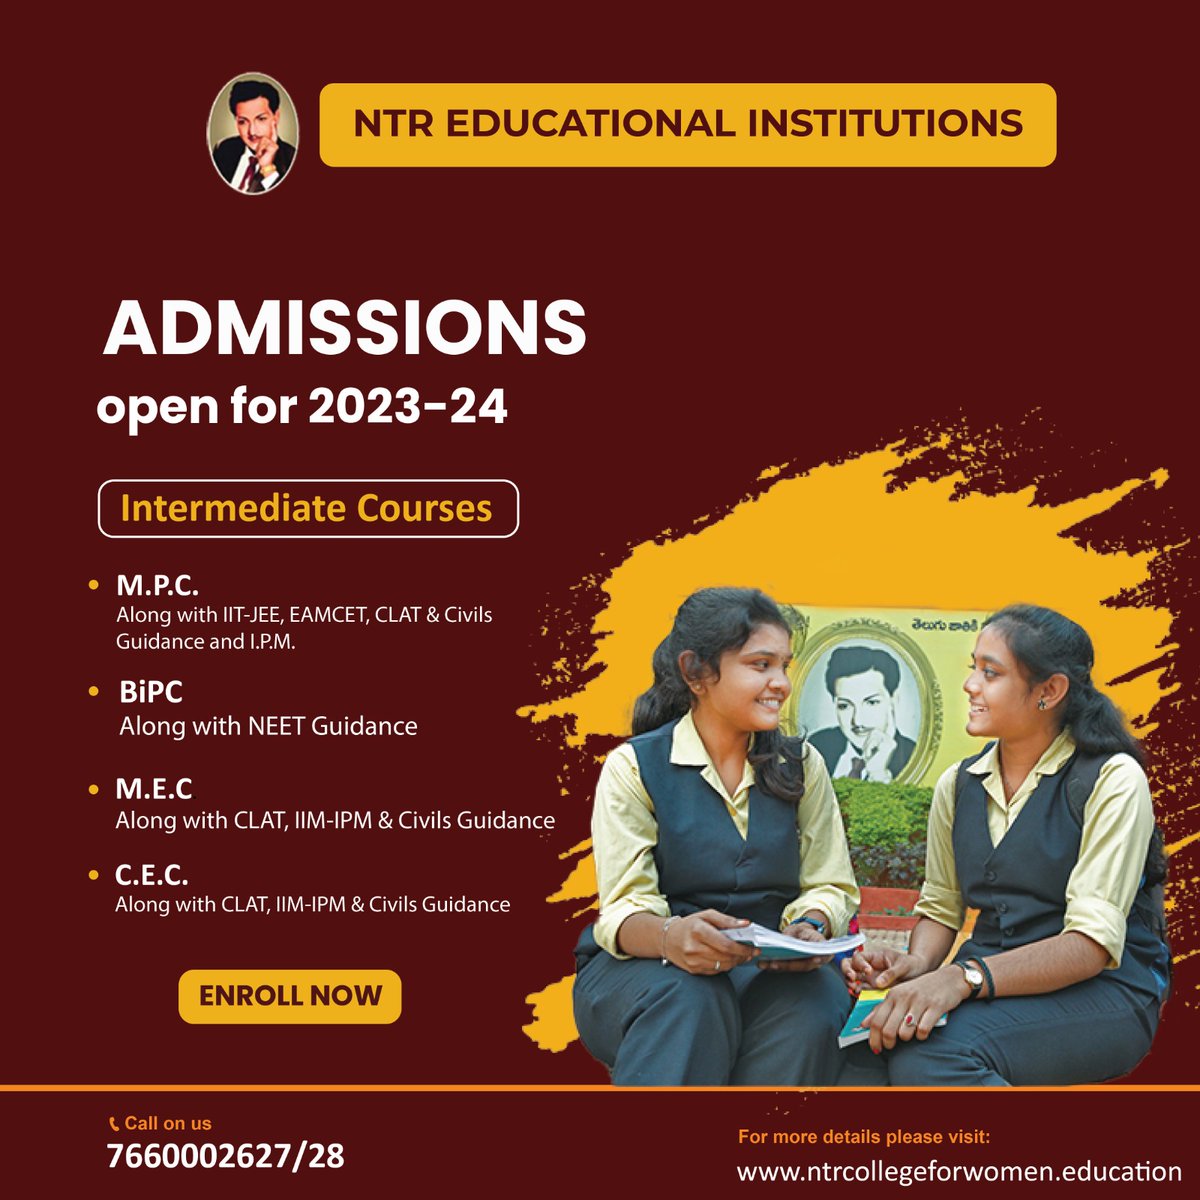 Don't miss this incredible opportunity to embark on a transformative educational journey with us. Take the leap and apply today. Your future awaits at [NTR JUNIOR & DEGREE COLLEGE FOR WOMEN].
#NTREducationalinstitutions #Education #NTRTrust #NTRMemorialTrust #admissions2023_24